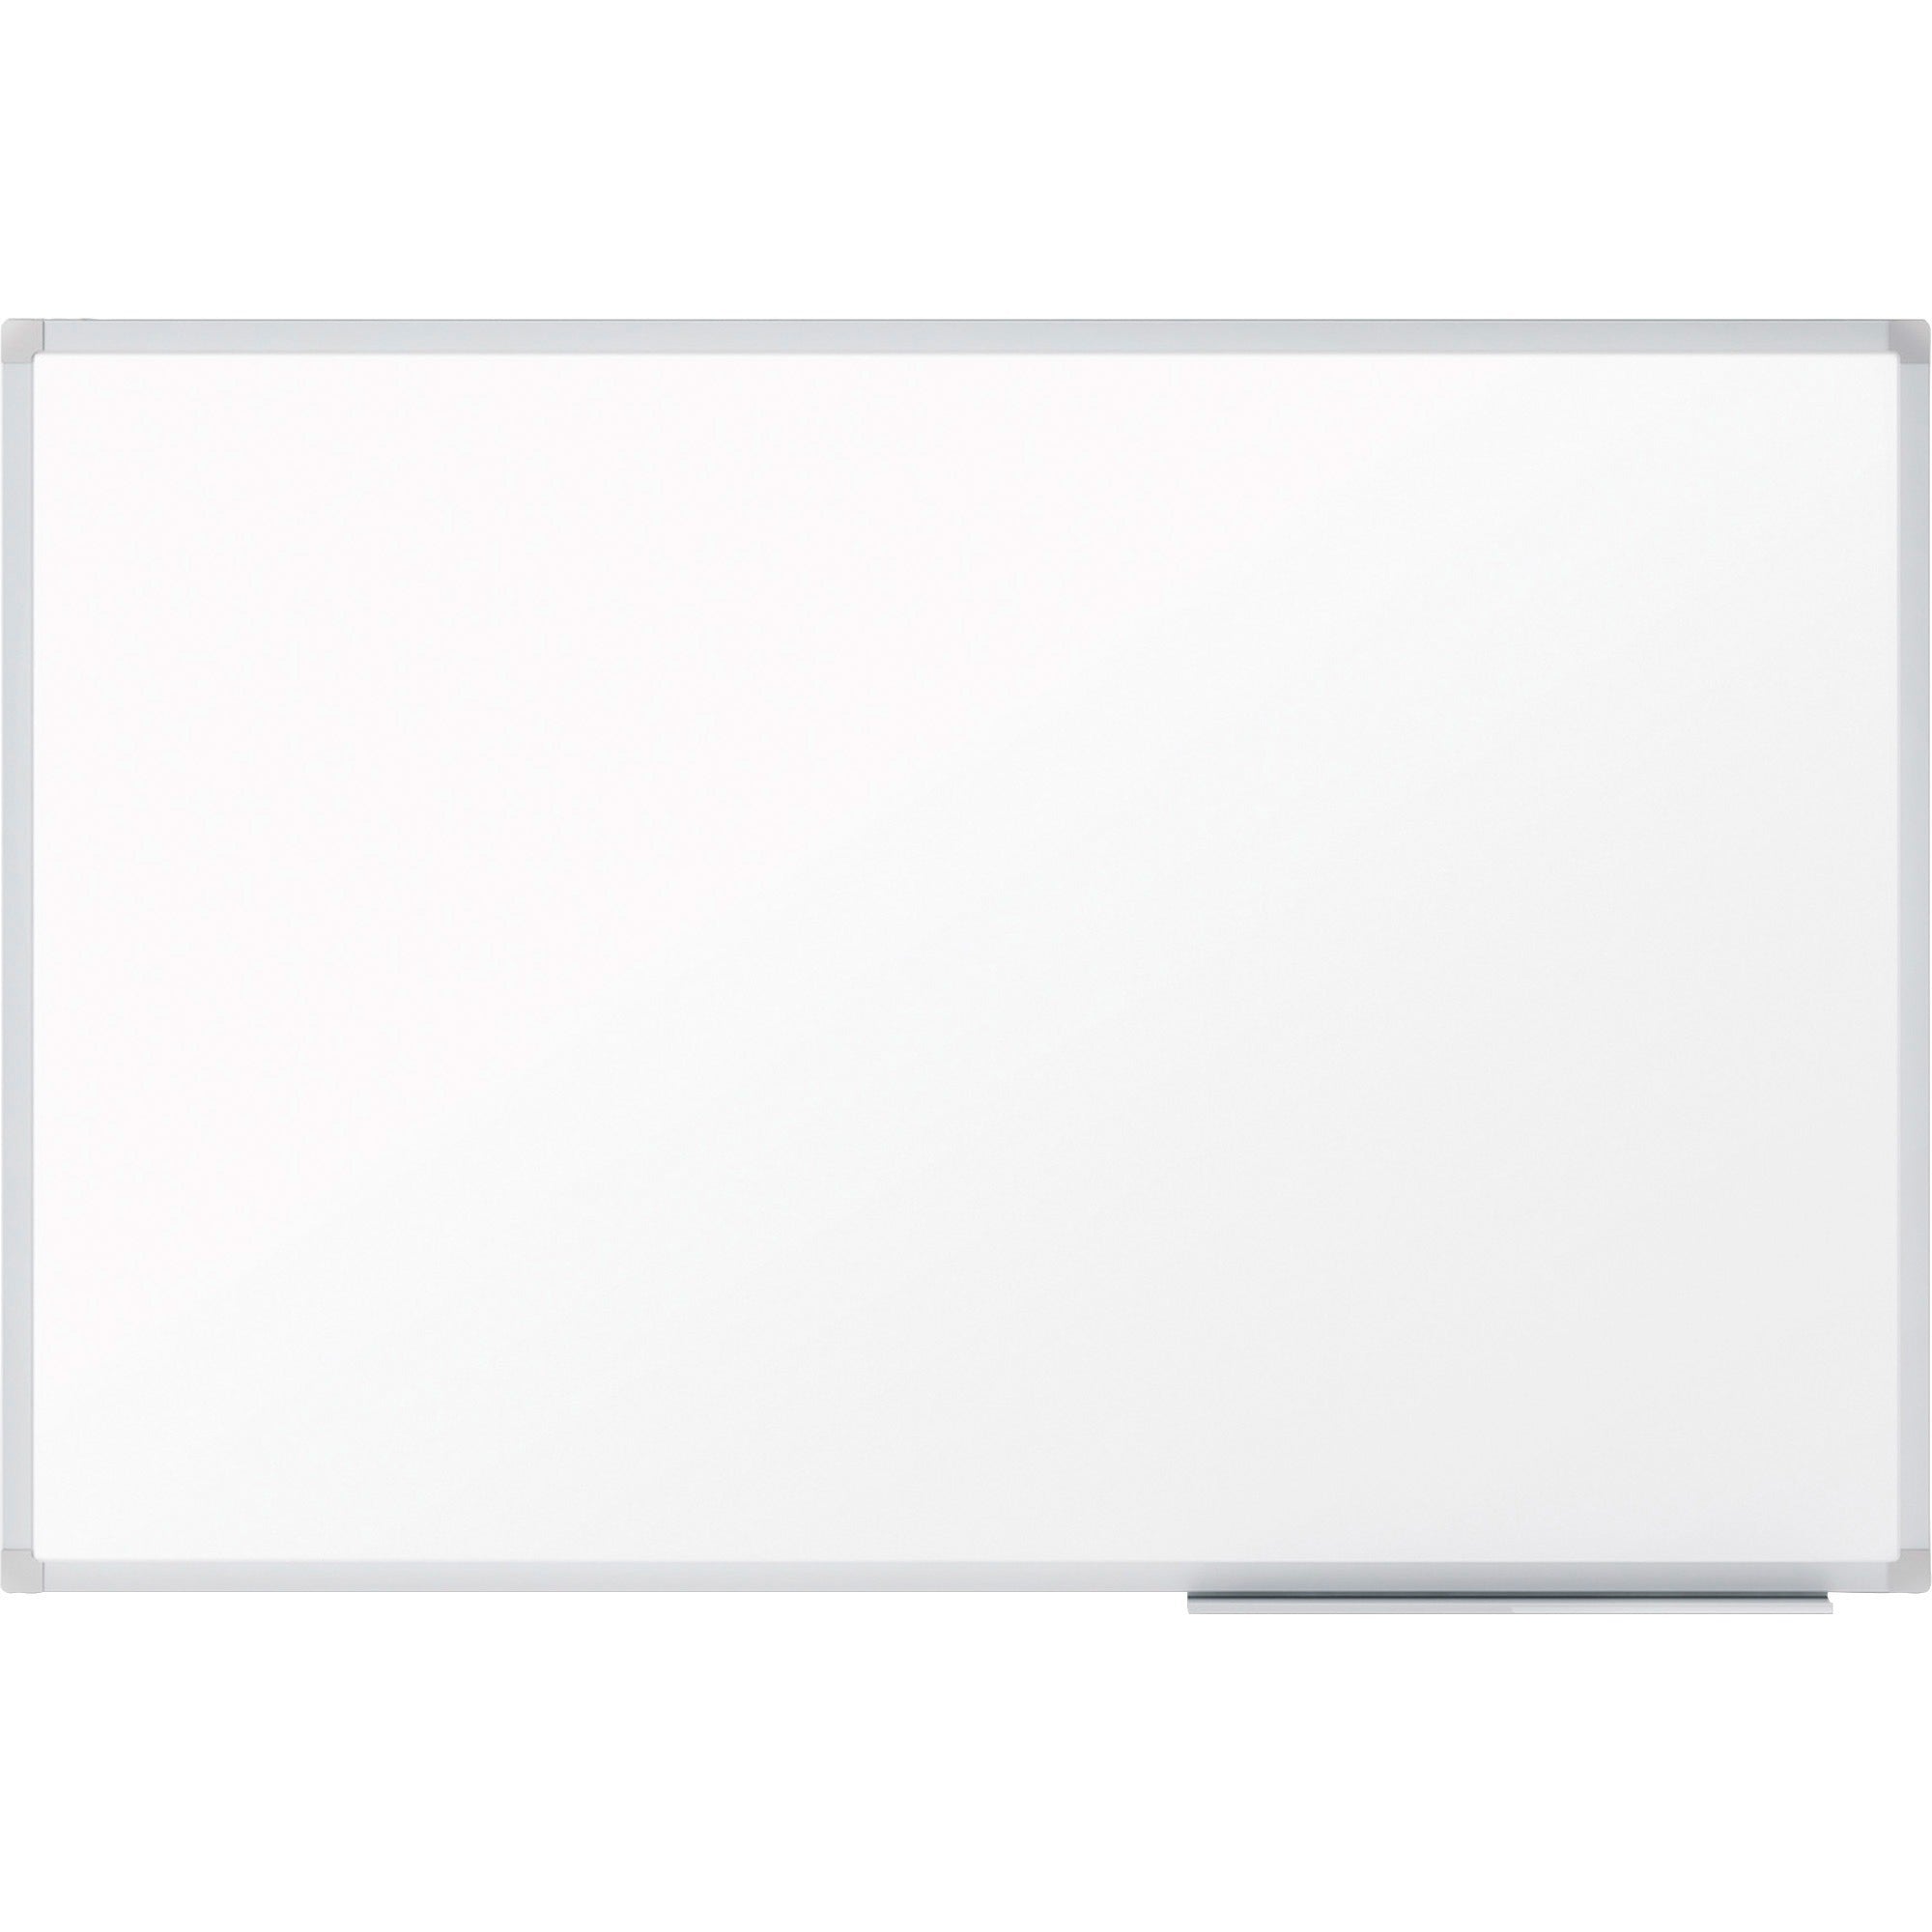 Mead Basic Dry-Erase Board - 23.8" (2 ft) Width x 17.6" (1.5 ft) Height - White Melamine Surface - Silver Aluminum Frame - Durable, Marker Tray - 1 Each - 1